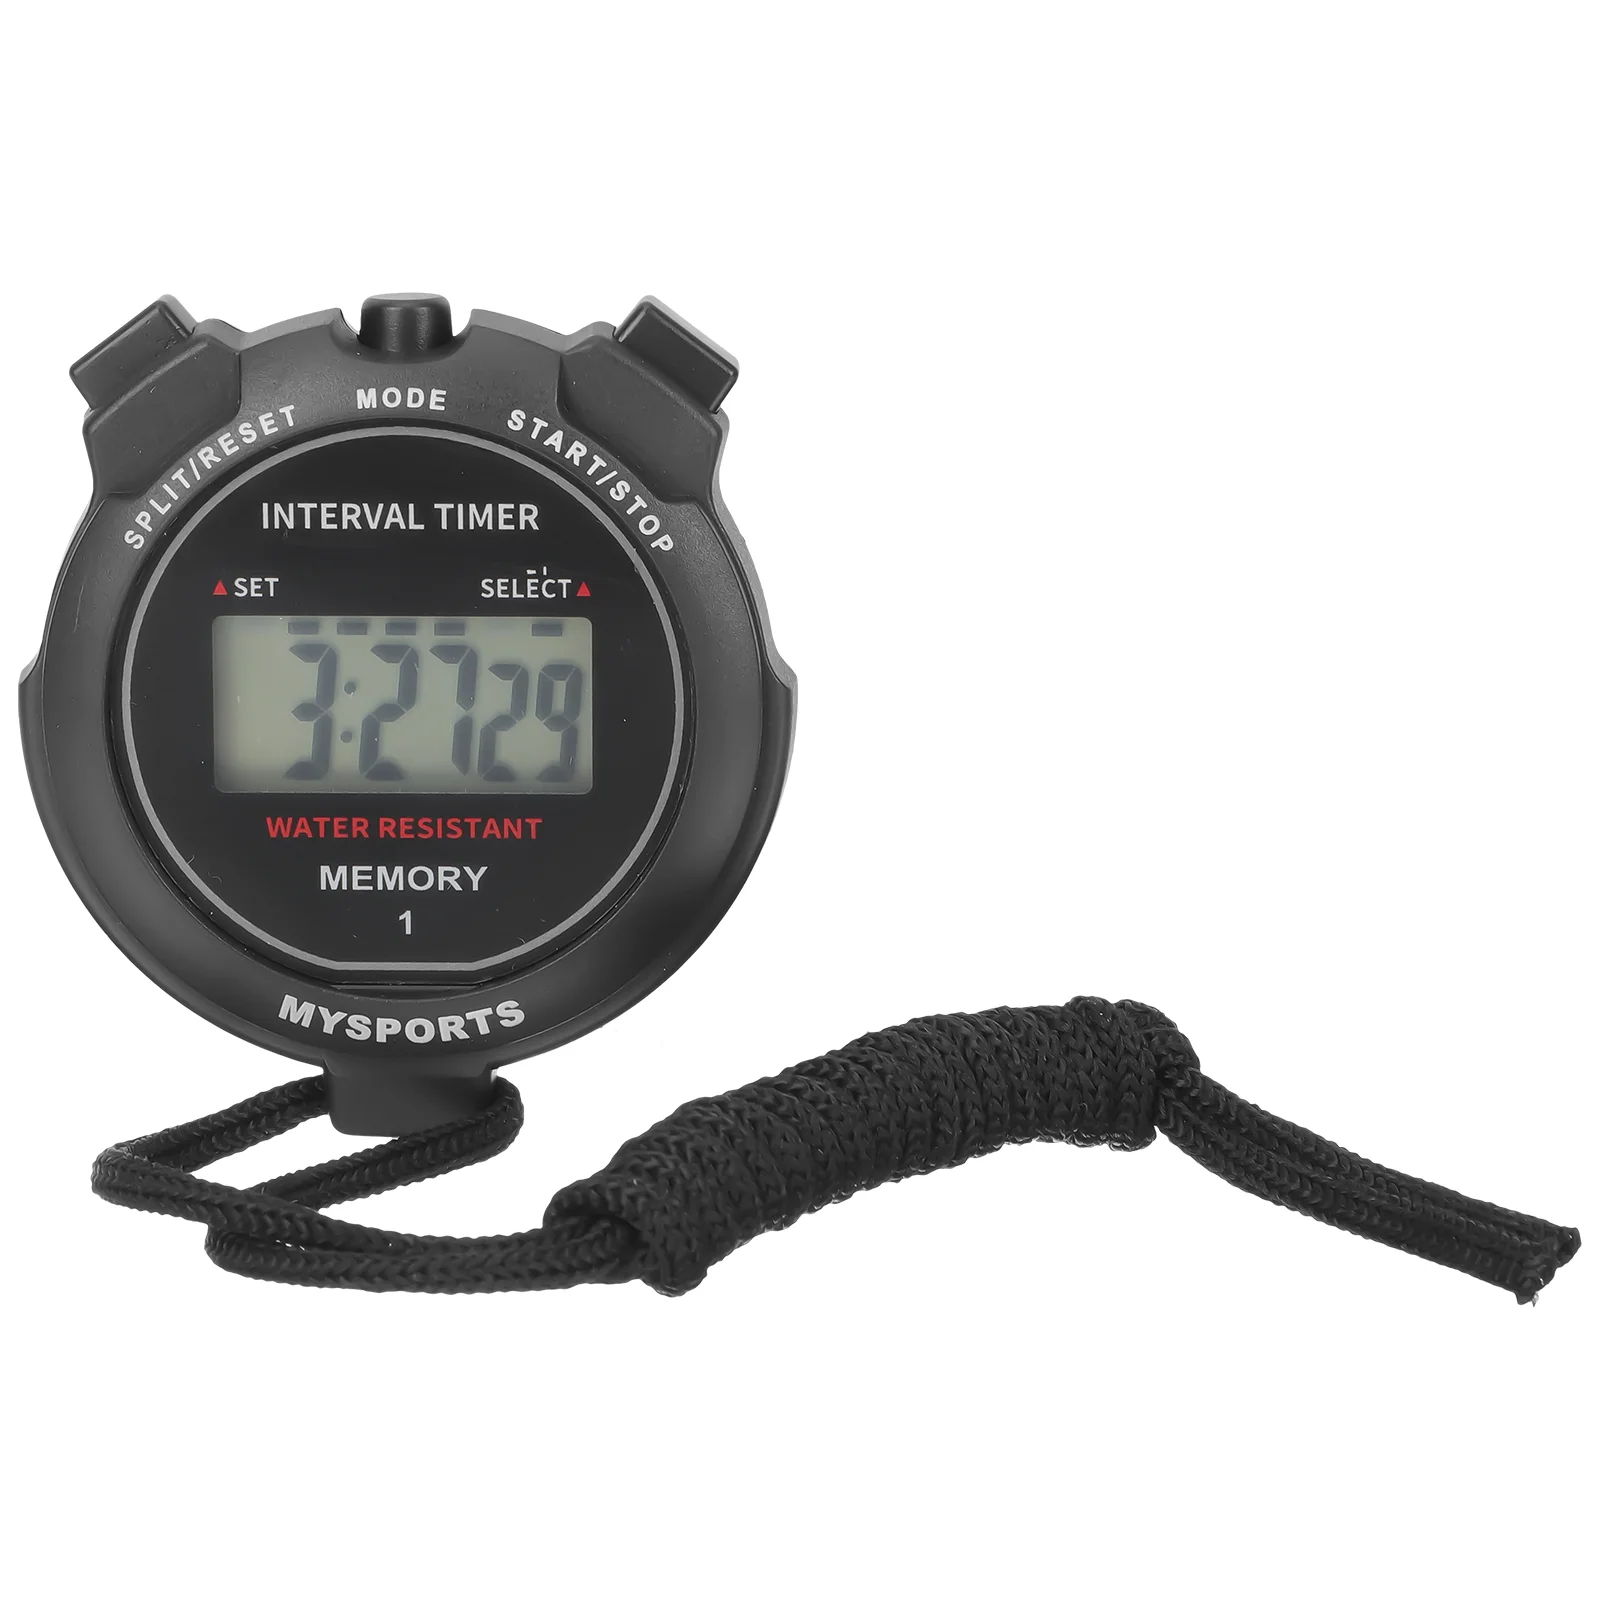 

Waterproof Chronograph Digital Timer Referees Sports Stopwatch LCD Teacher Electronic Multi-Function Handheld